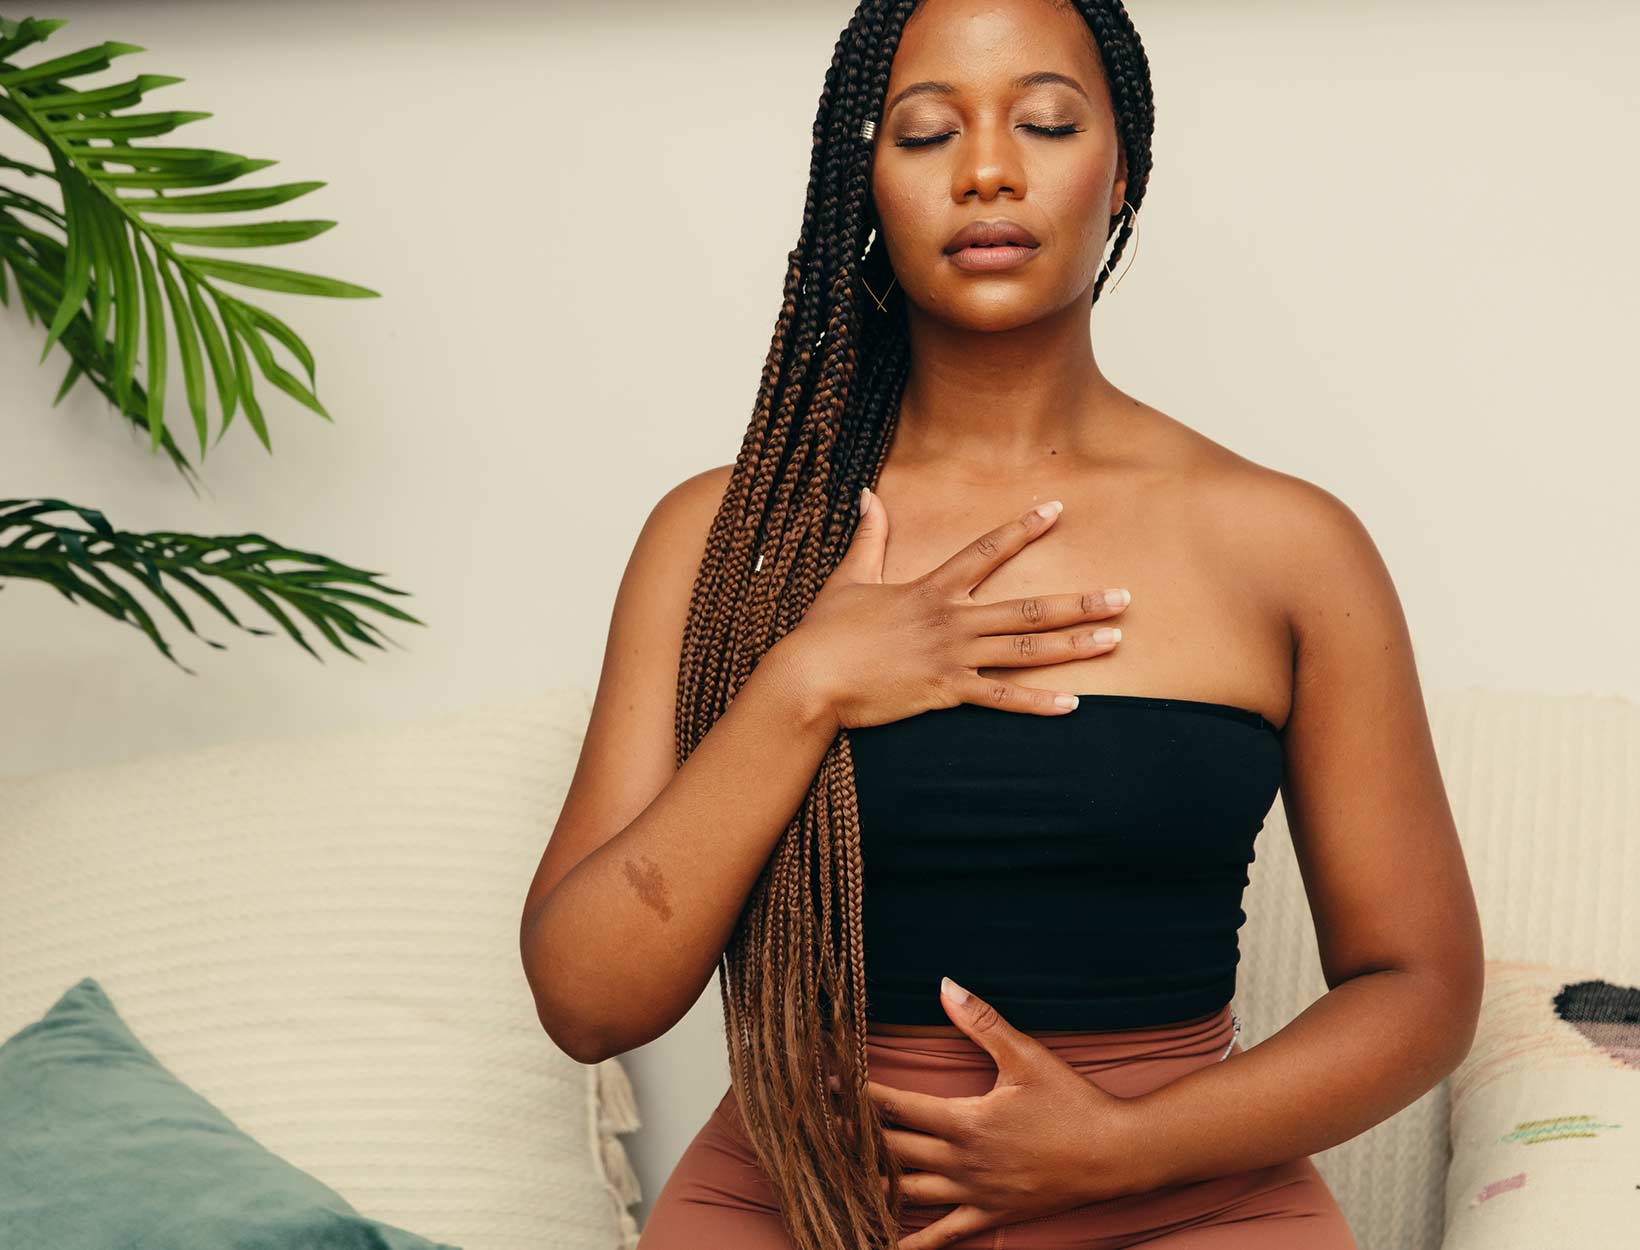 Jasmine Sandal Sex Video - The Breathwork Practitioner Who Holds Space for Racial Trauma | goop